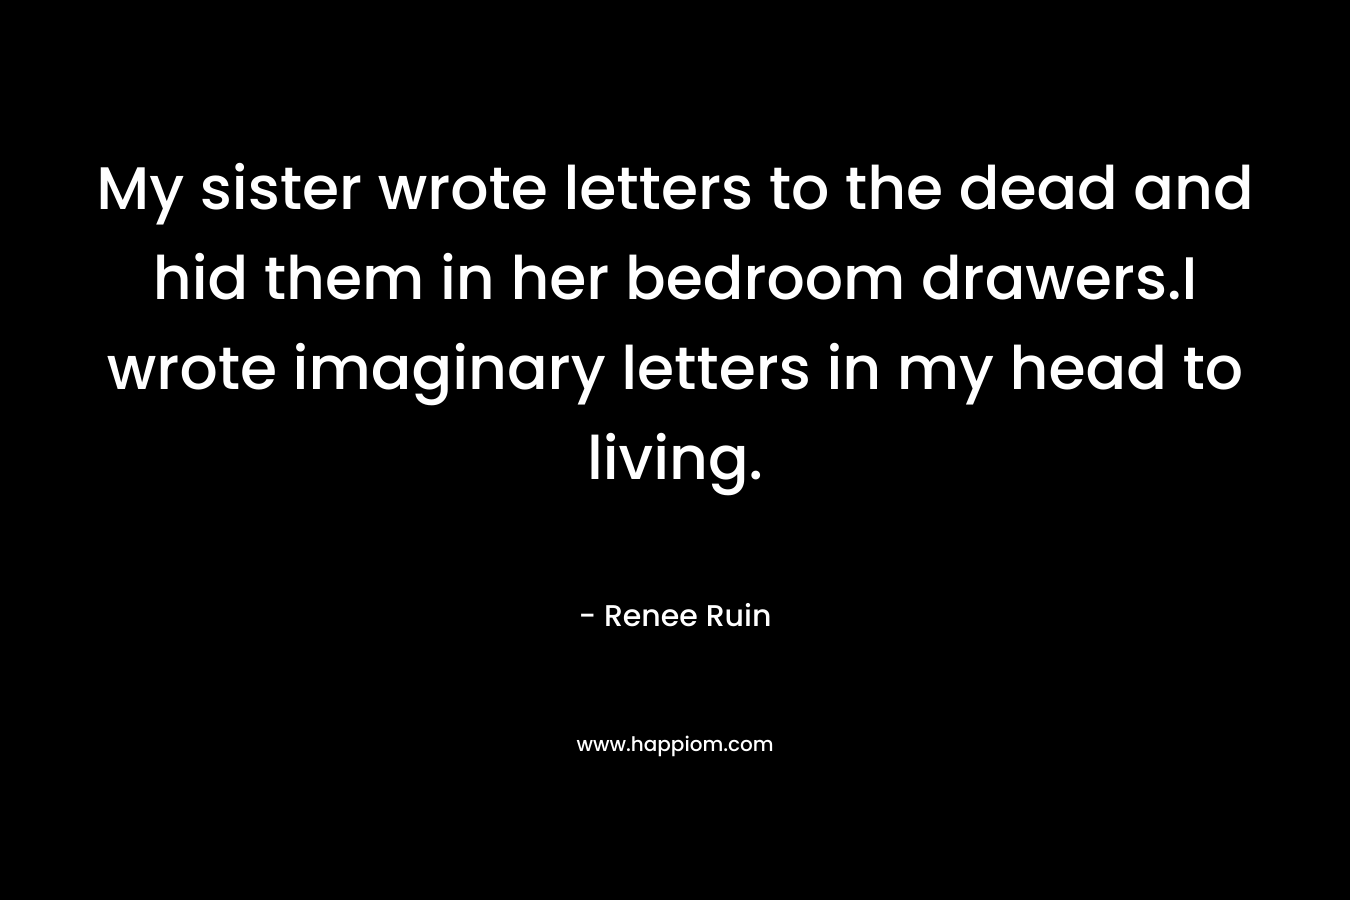 My sister wrote letters to the dead and hid them in her bedroom drawers.I wrote imaginary letters in my head to living.